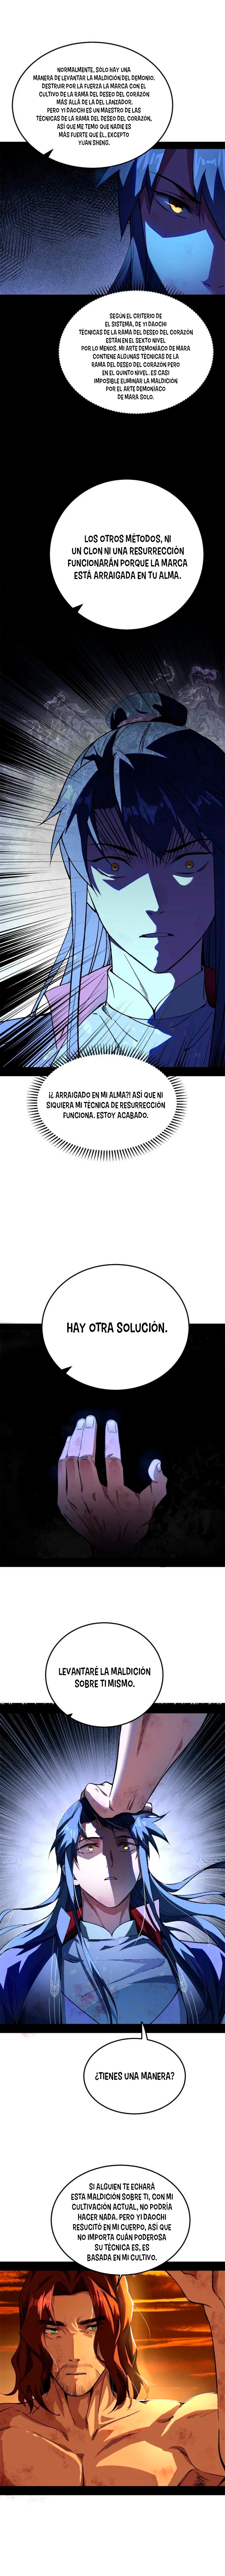 Manga Soy un dios maligno Chapter 311 image number 8